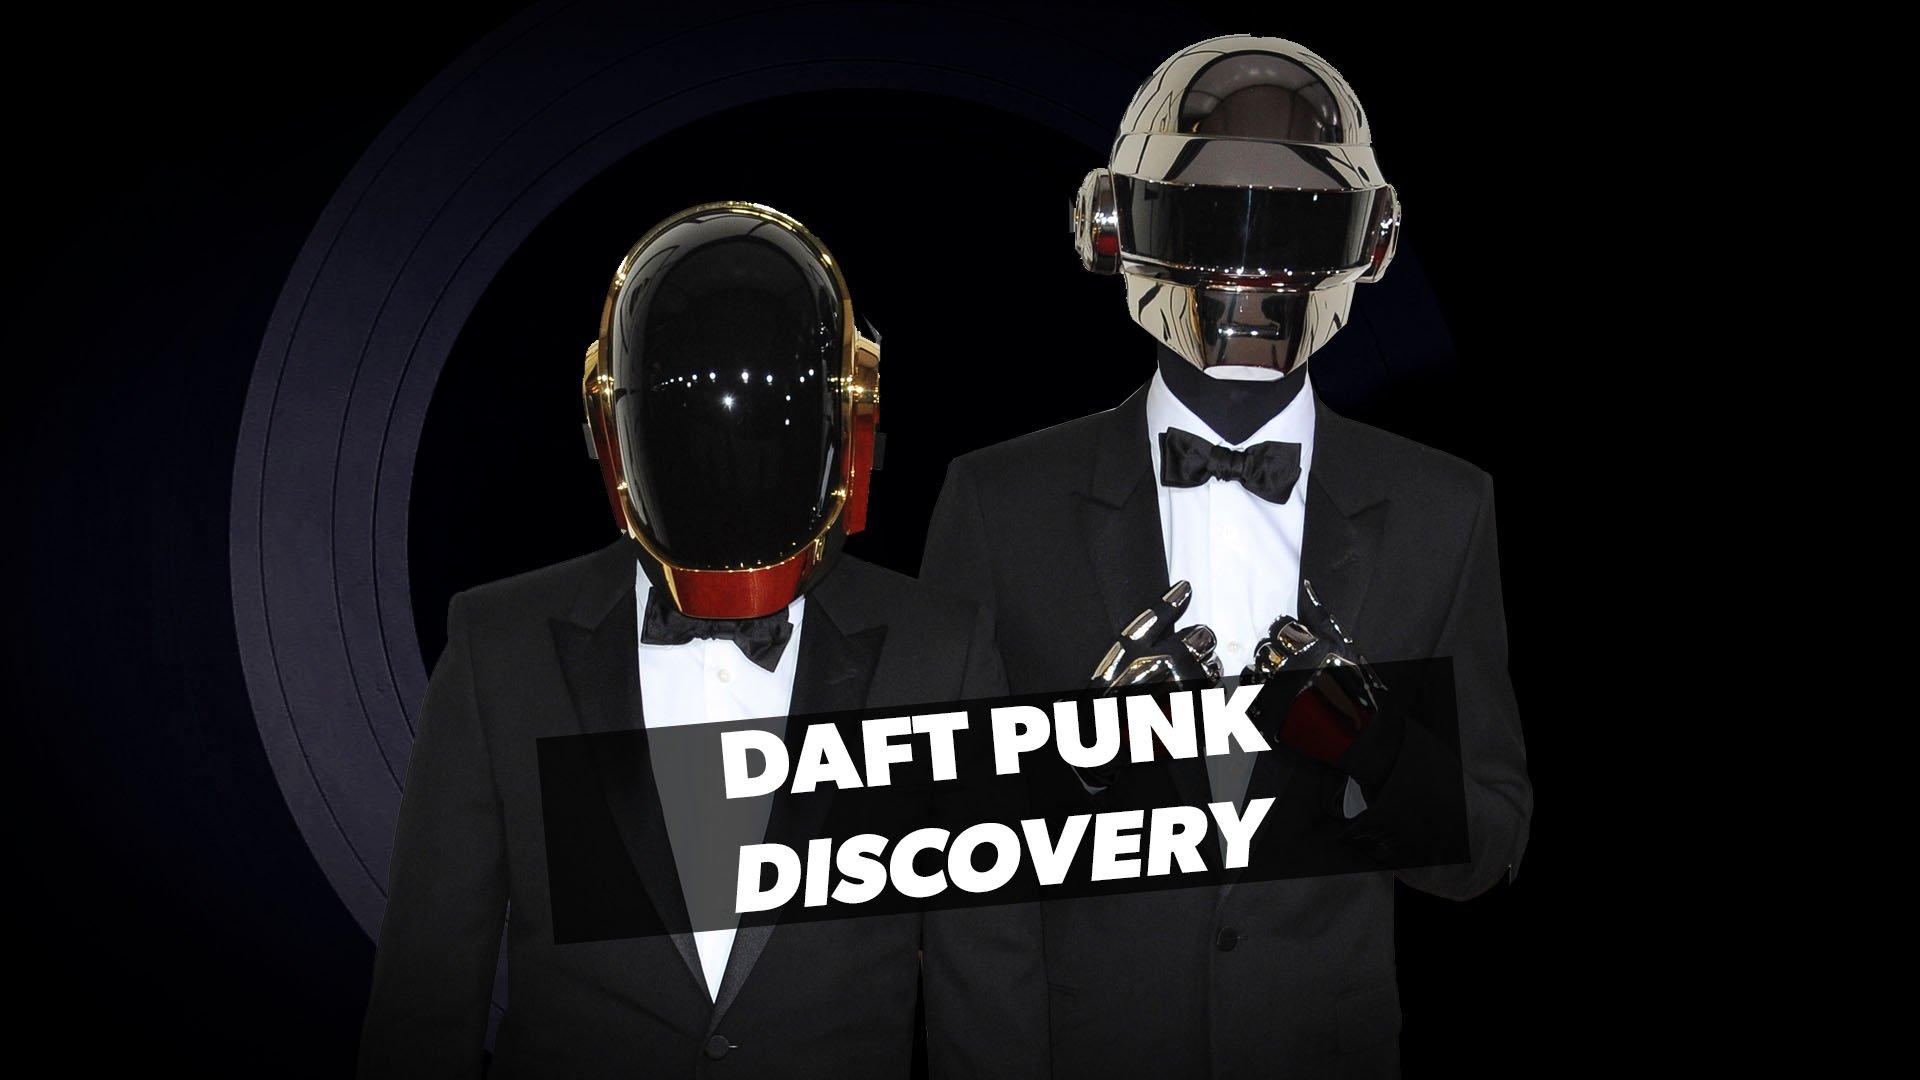 For The Record: Daft Punk’s ‘Discovery’ 